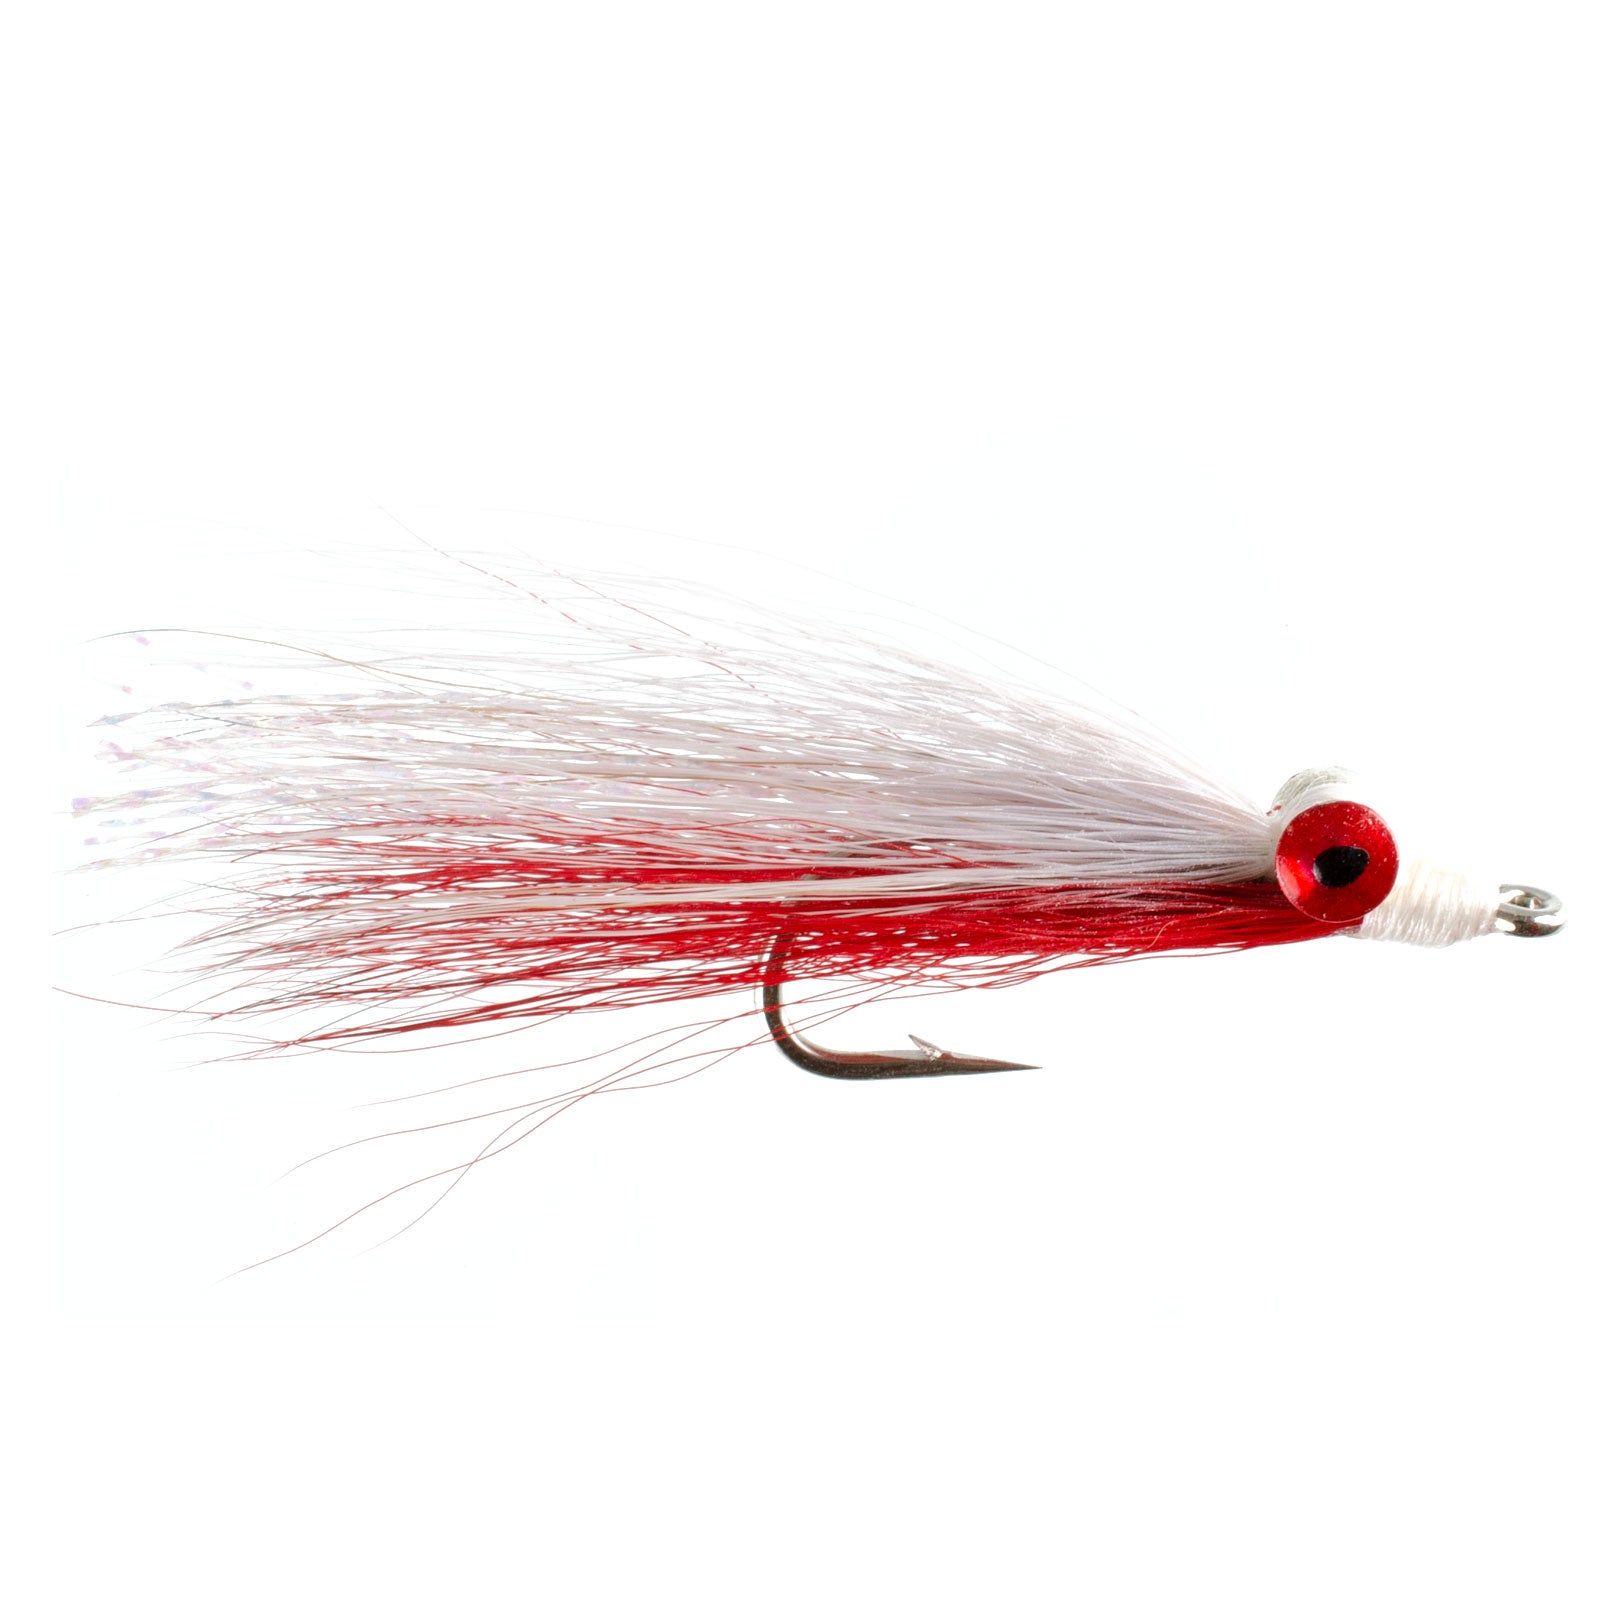 Clousers Deep Minnow Red White - Streamer Fly Fishing Flies - 4 Saltwater and Bass Flies - Hook Size 1/0